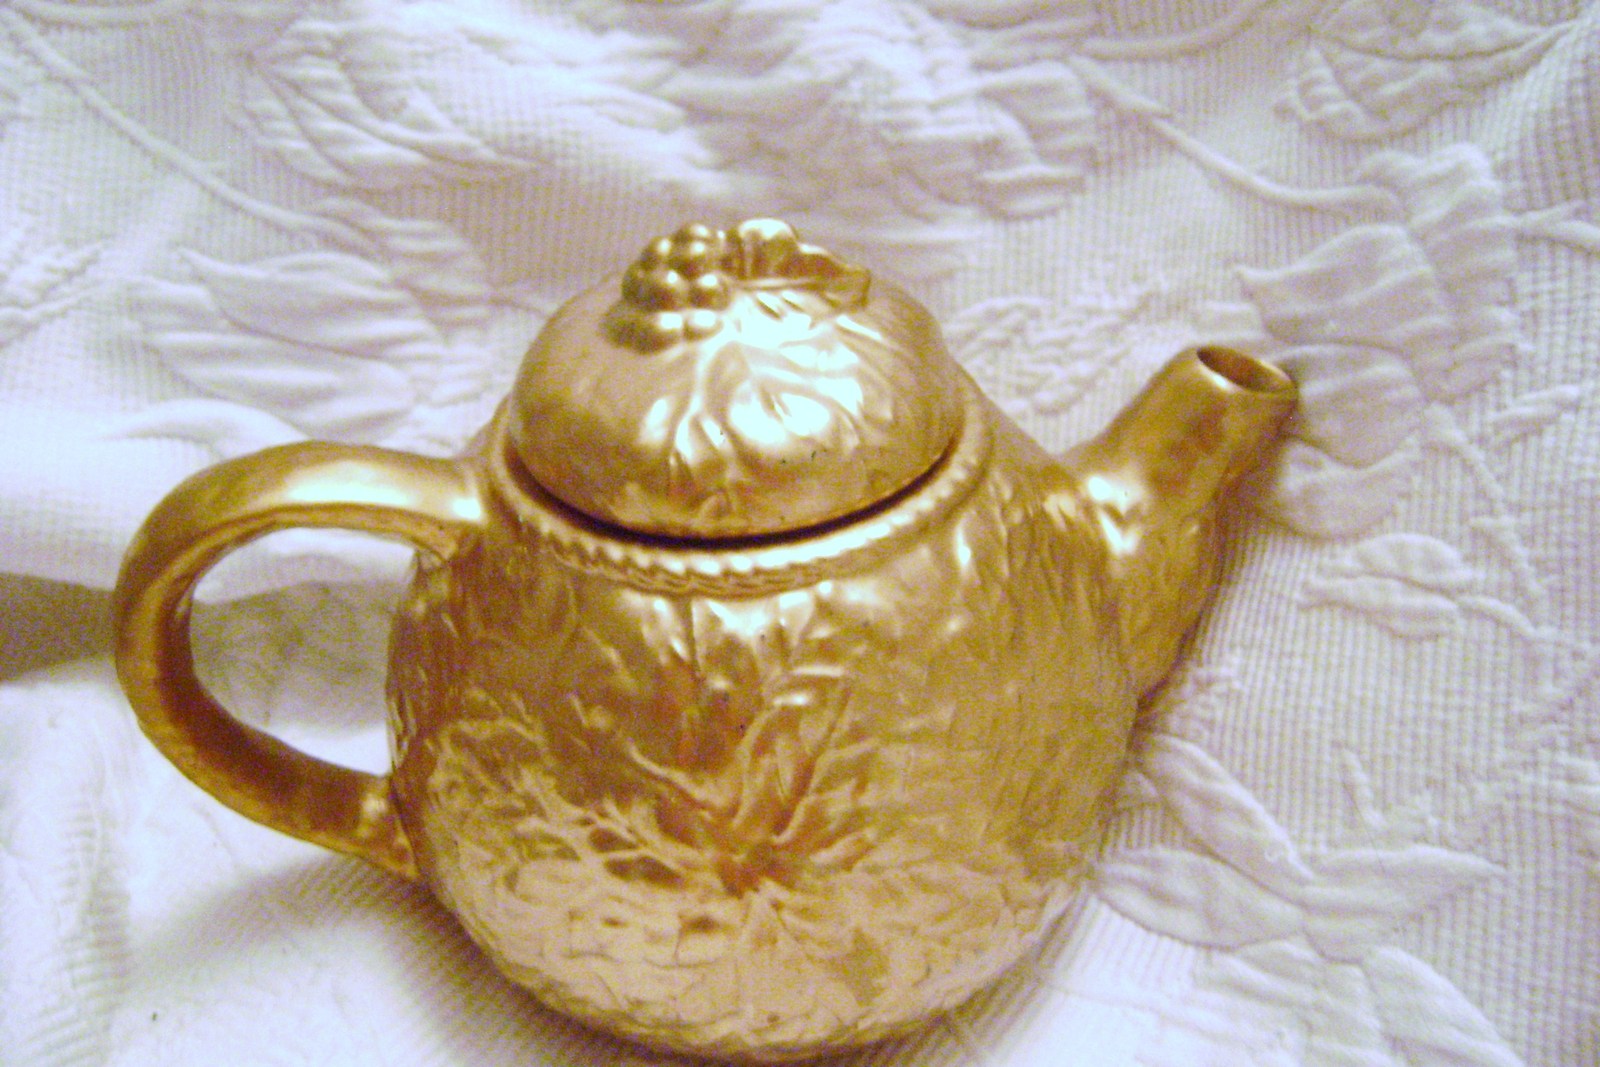 Primary image for Ceramic Gold Teapot with Azure Blue Interior